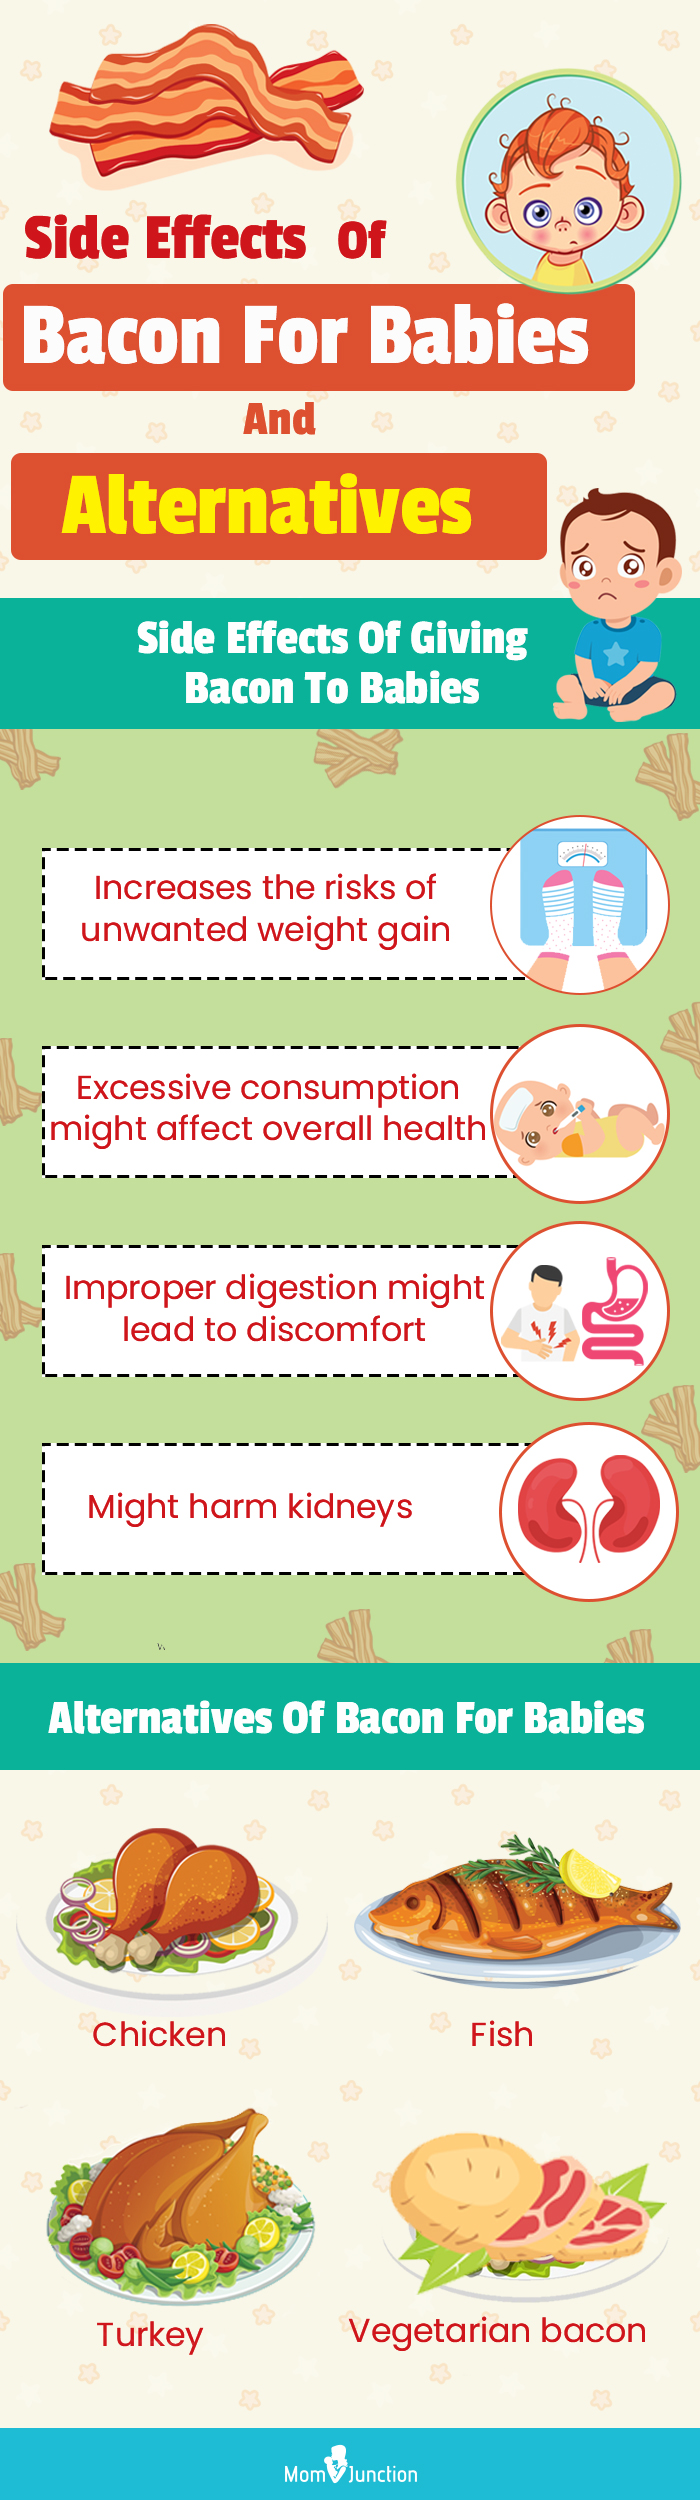 side effects of bacon for babies and alternatives (infographic)